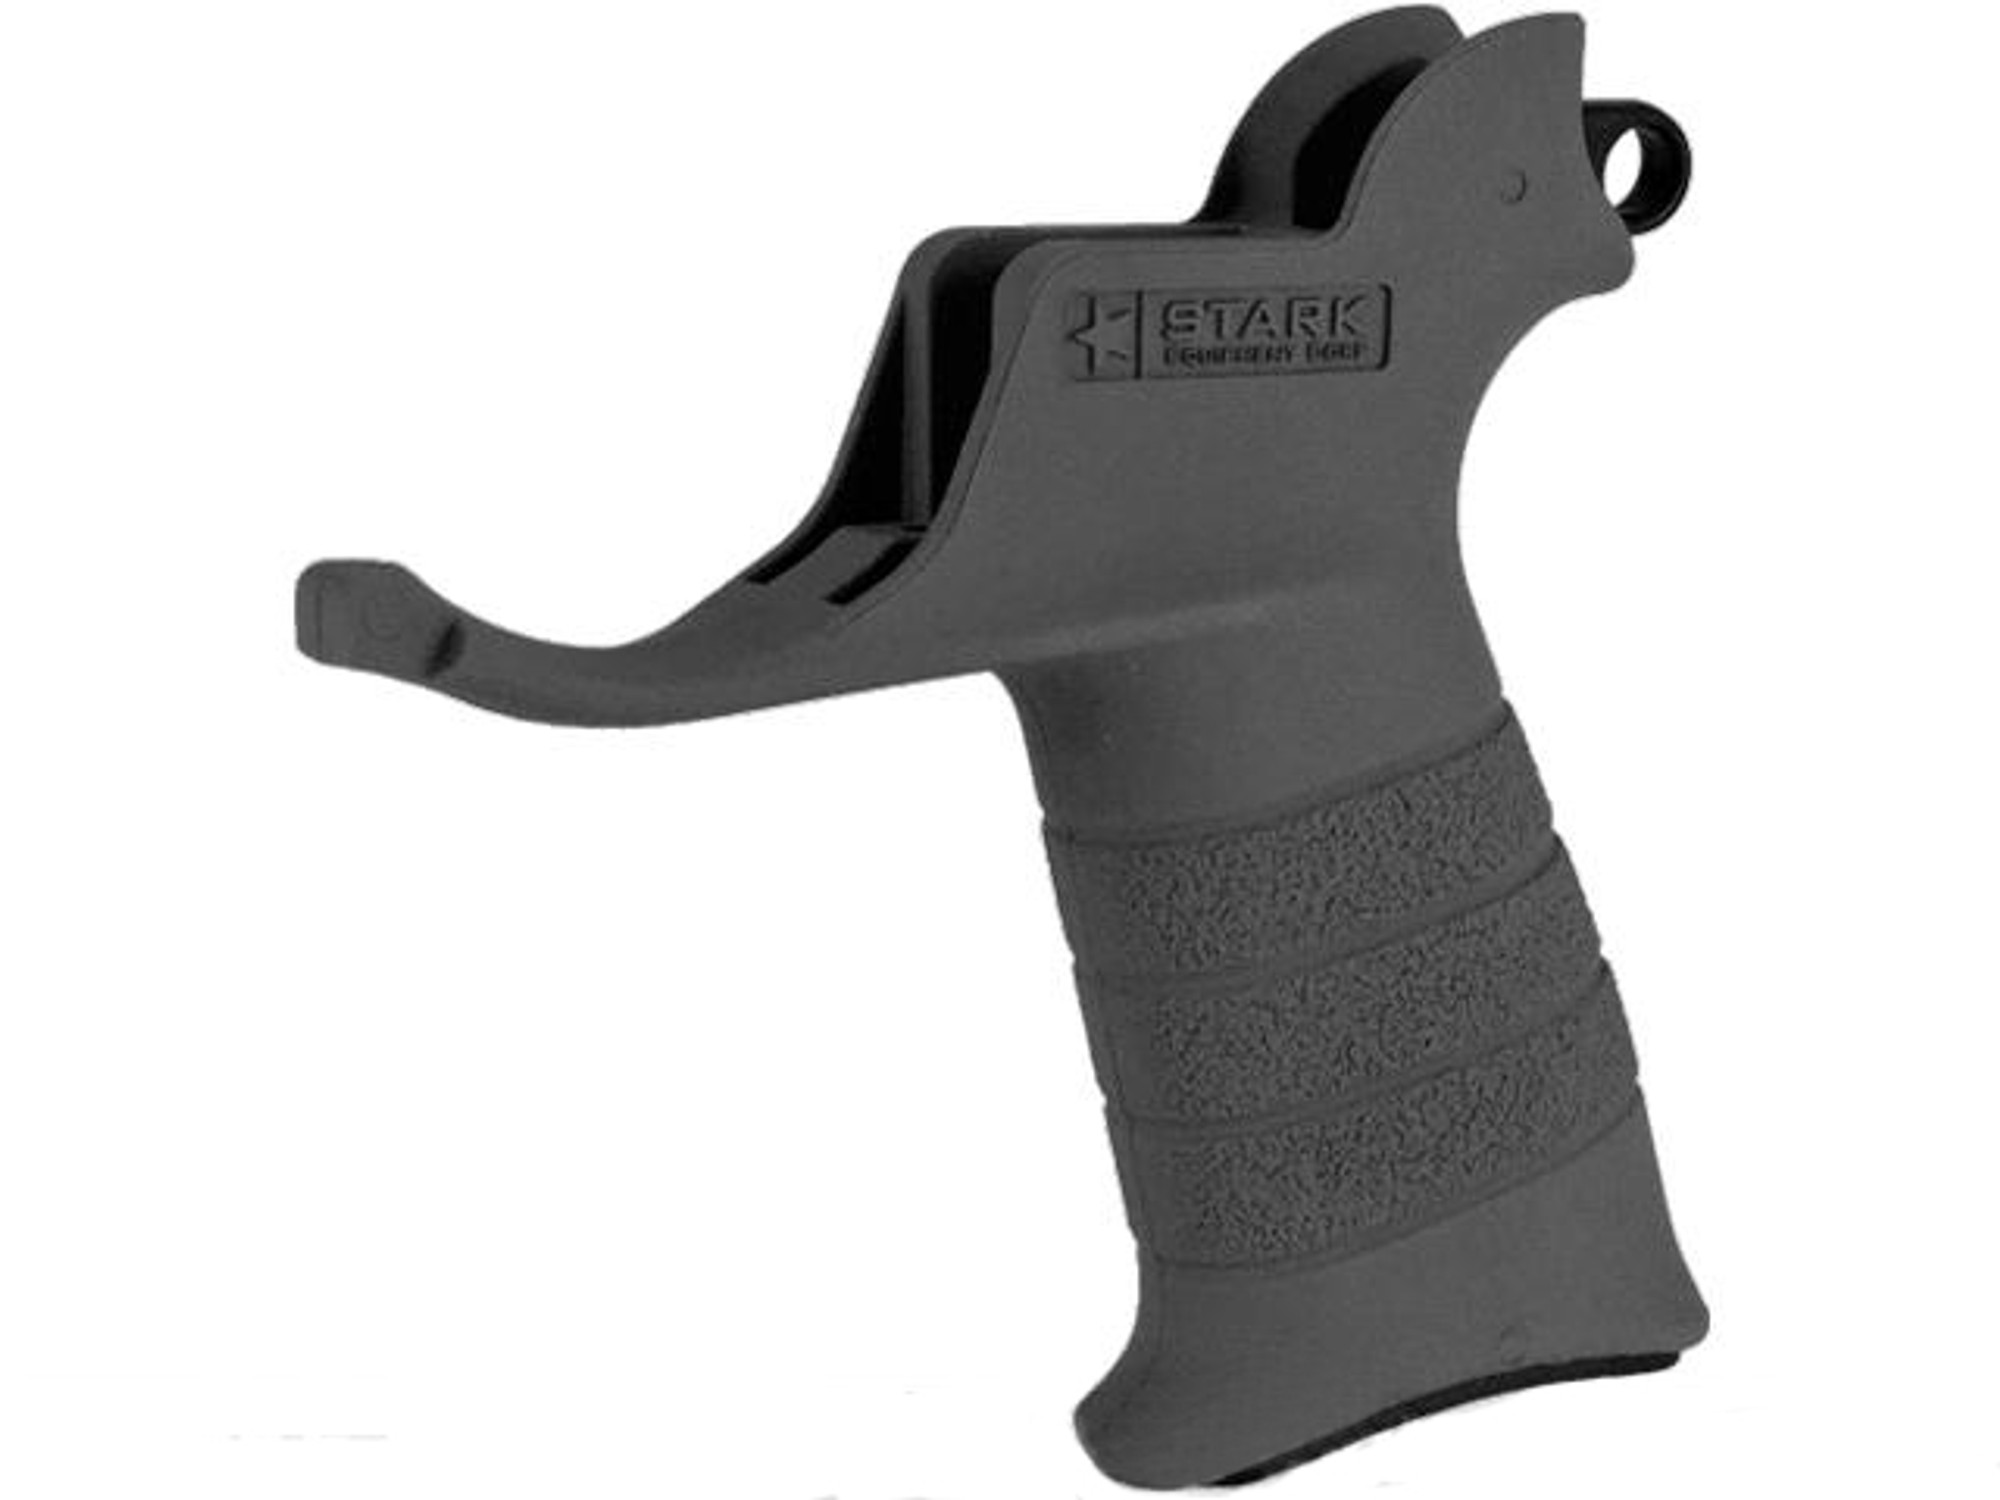 Stark Equipment AR SE2 Grip for M4 / M16 Series Airsoft GBB and Real Steel AR15 Rifles - Sling Hook / Black